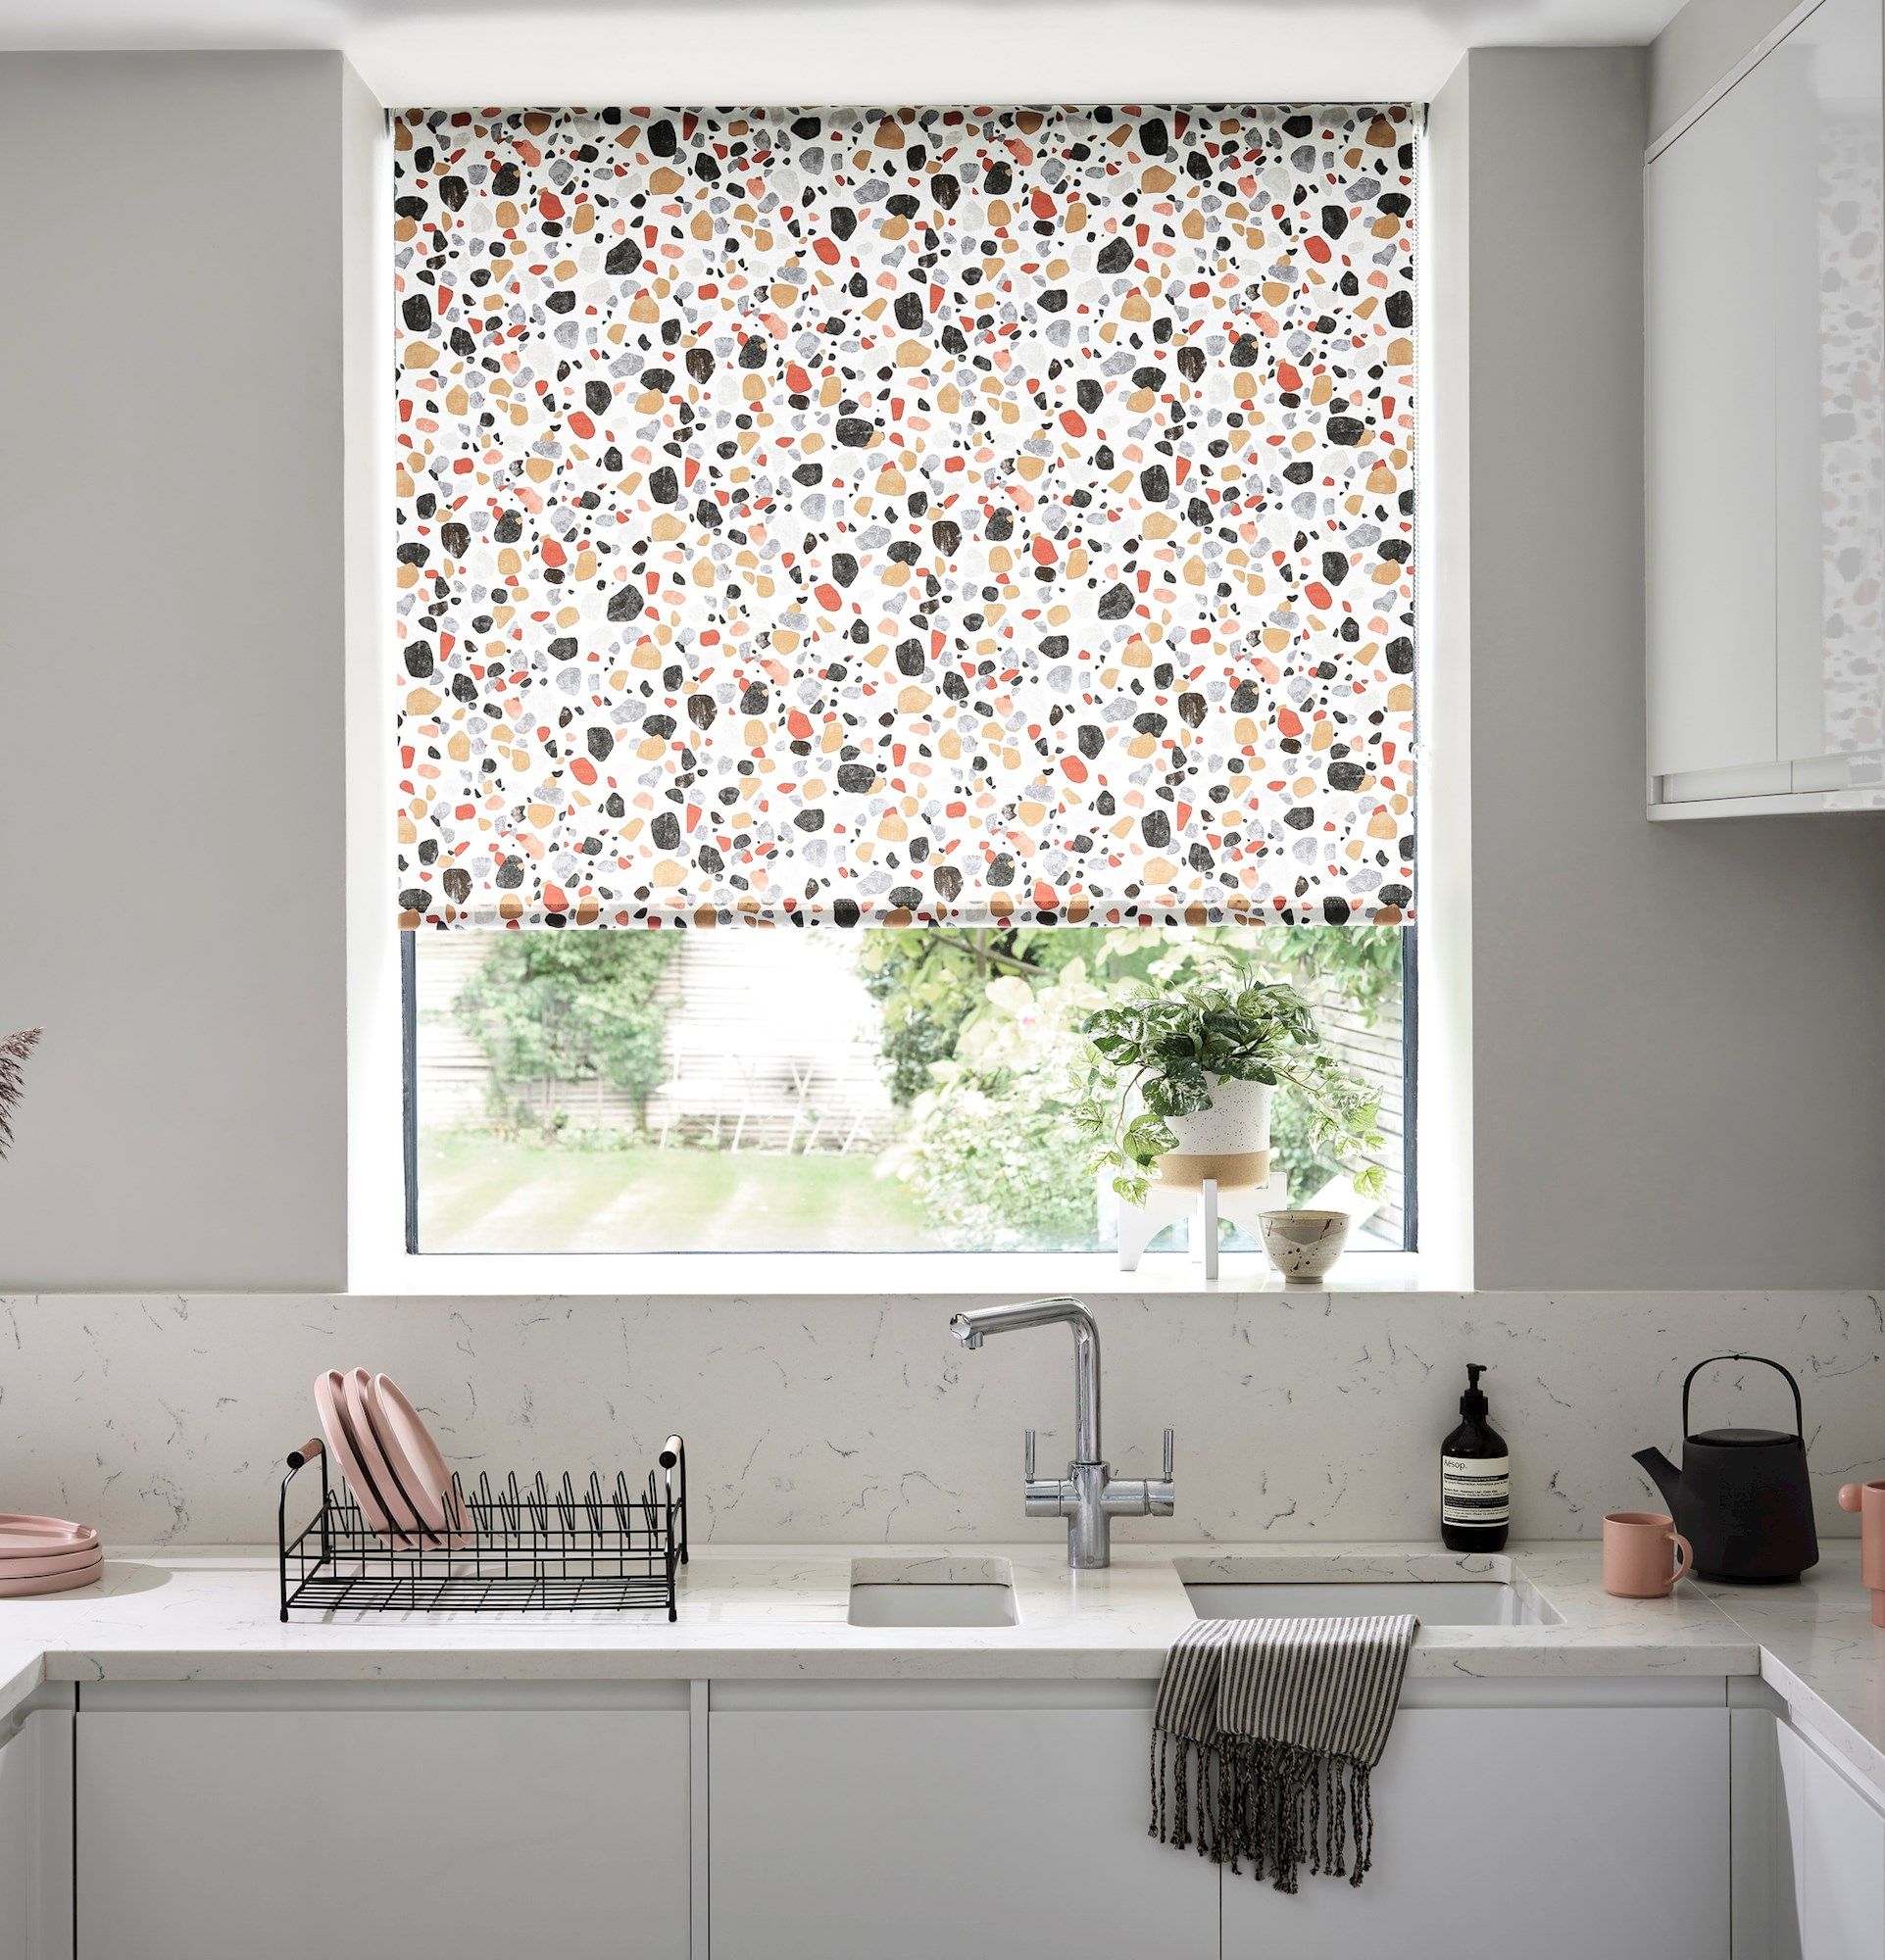 Hil 2021 Rollerslaunch Rollerblinds Lucca Brick Landscape Kitchen 0032 ?cb=20212303112313&mcb=5f884e47a7424cfe86340315ccaafed0